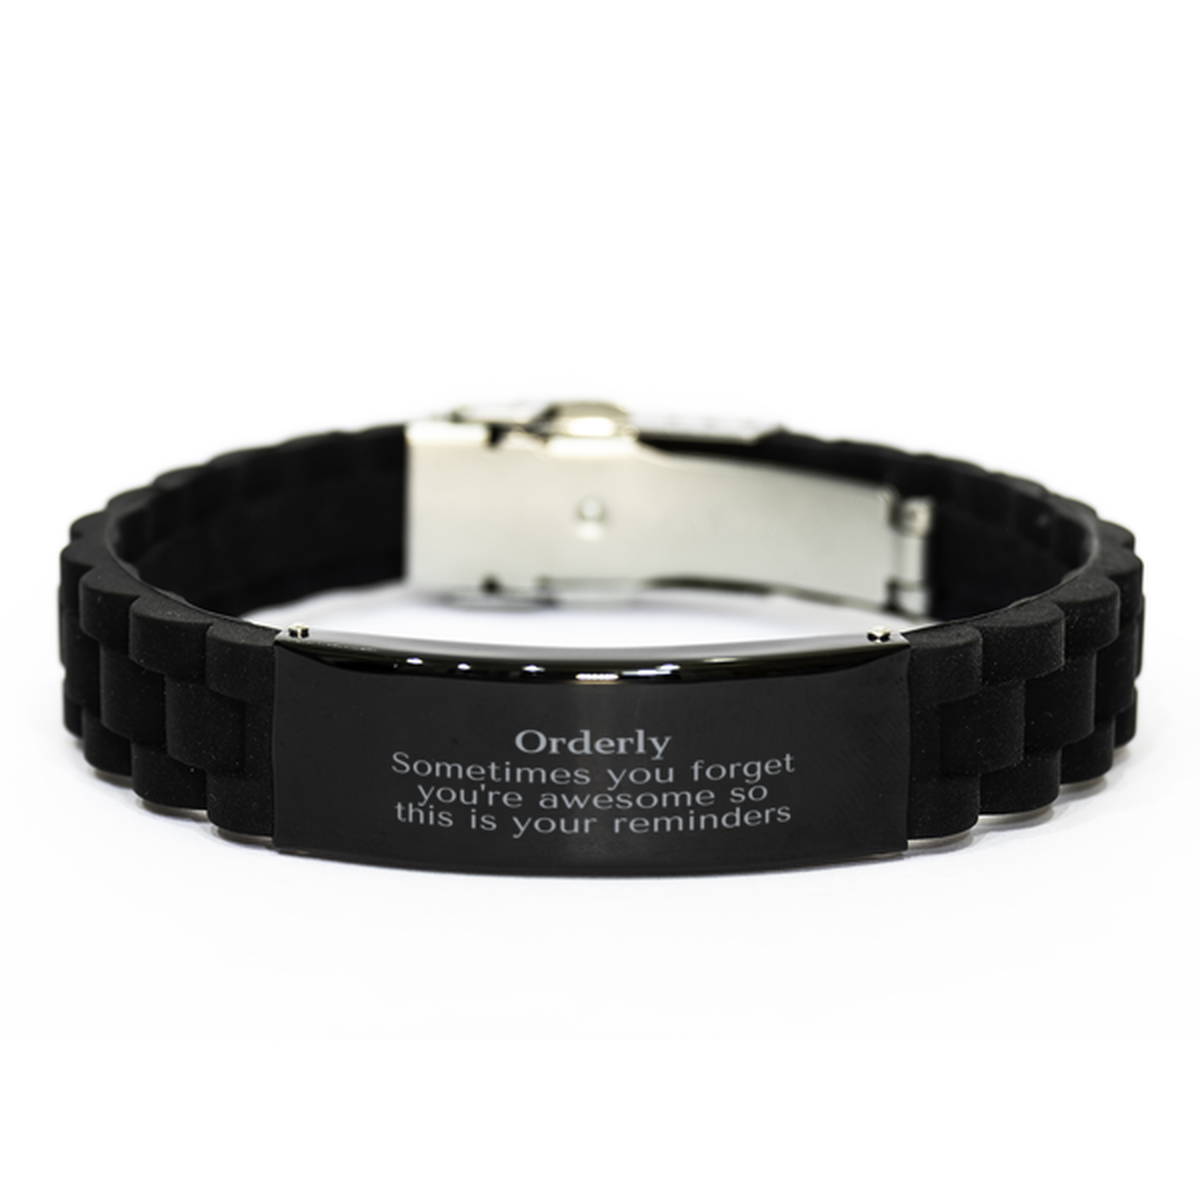 Sentimental Orderly Black Glidelock Clasp Bracelet, Orderly Sometimes you forget you're awesome so this is your reminders, Graduation Christmas Birthday Gifts for Orderly, Men, Women, Coworkers